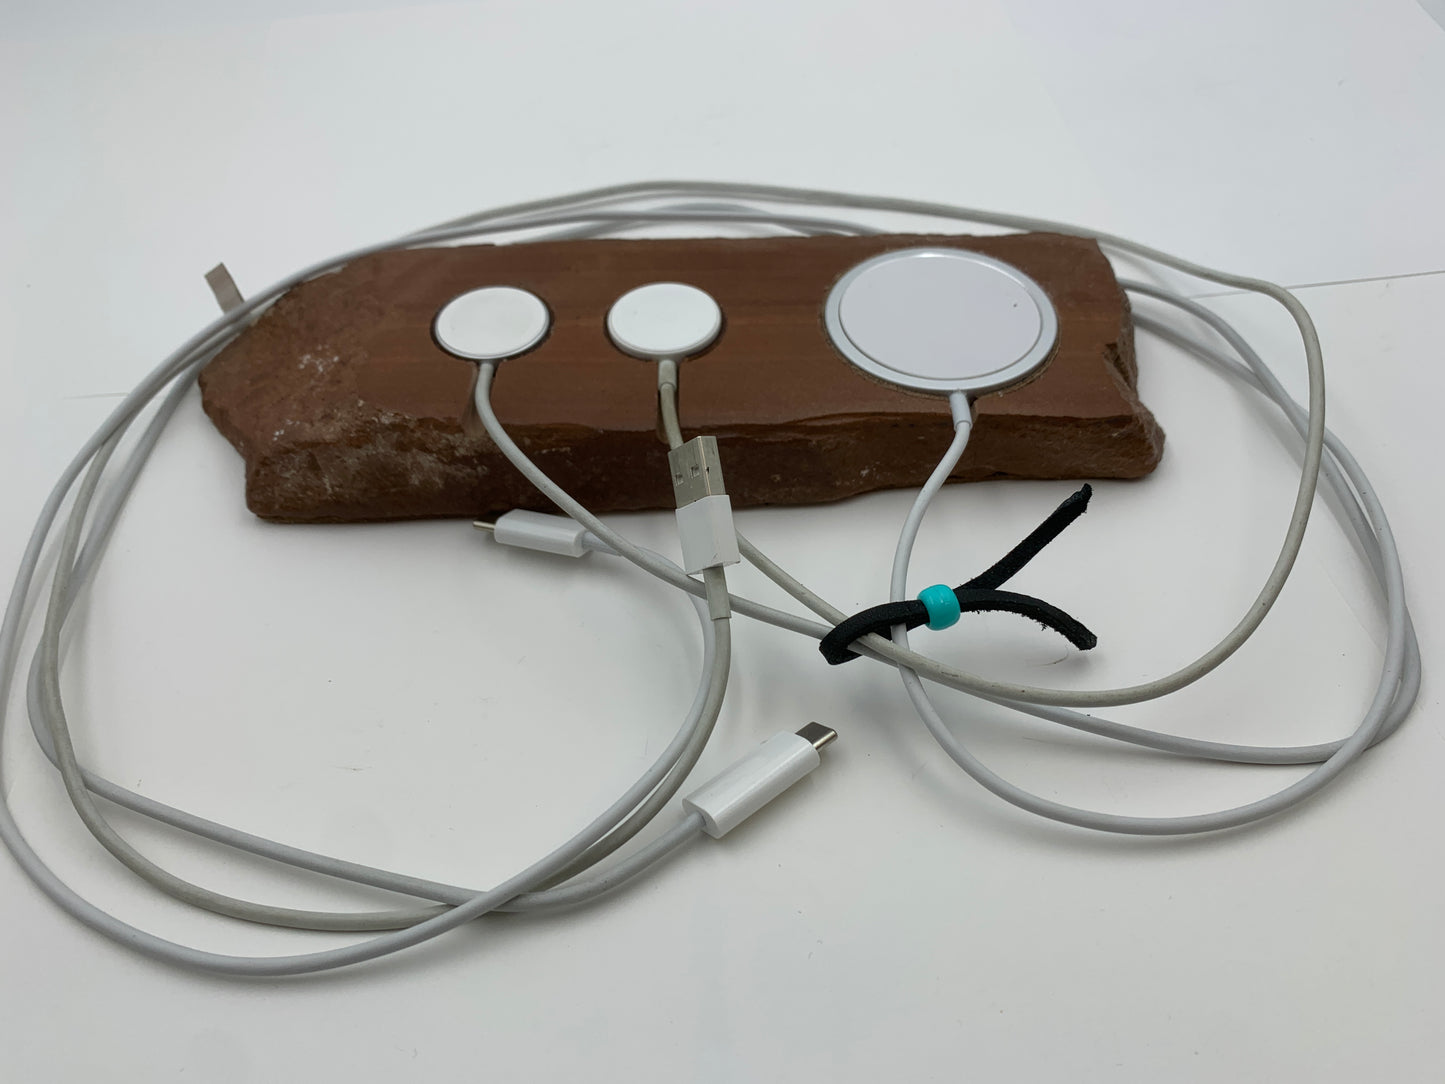 Native American Apple WATCH and iPhone Charging Stone (JT51)